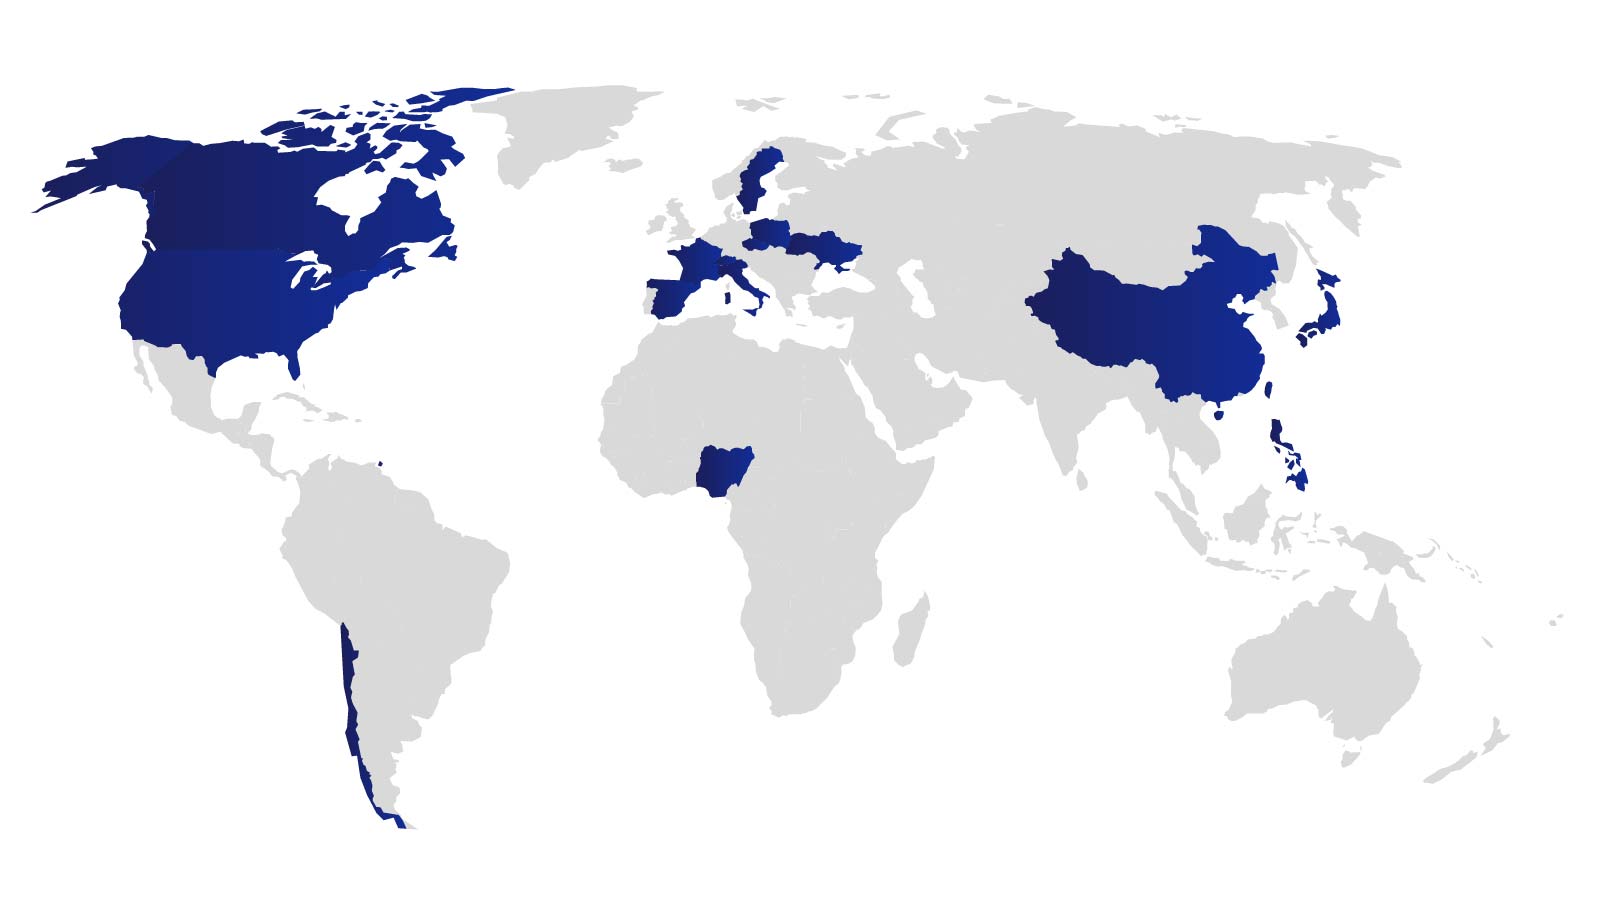 Map of countries/regions from where Team Visa athletes hail. See image description for more details.